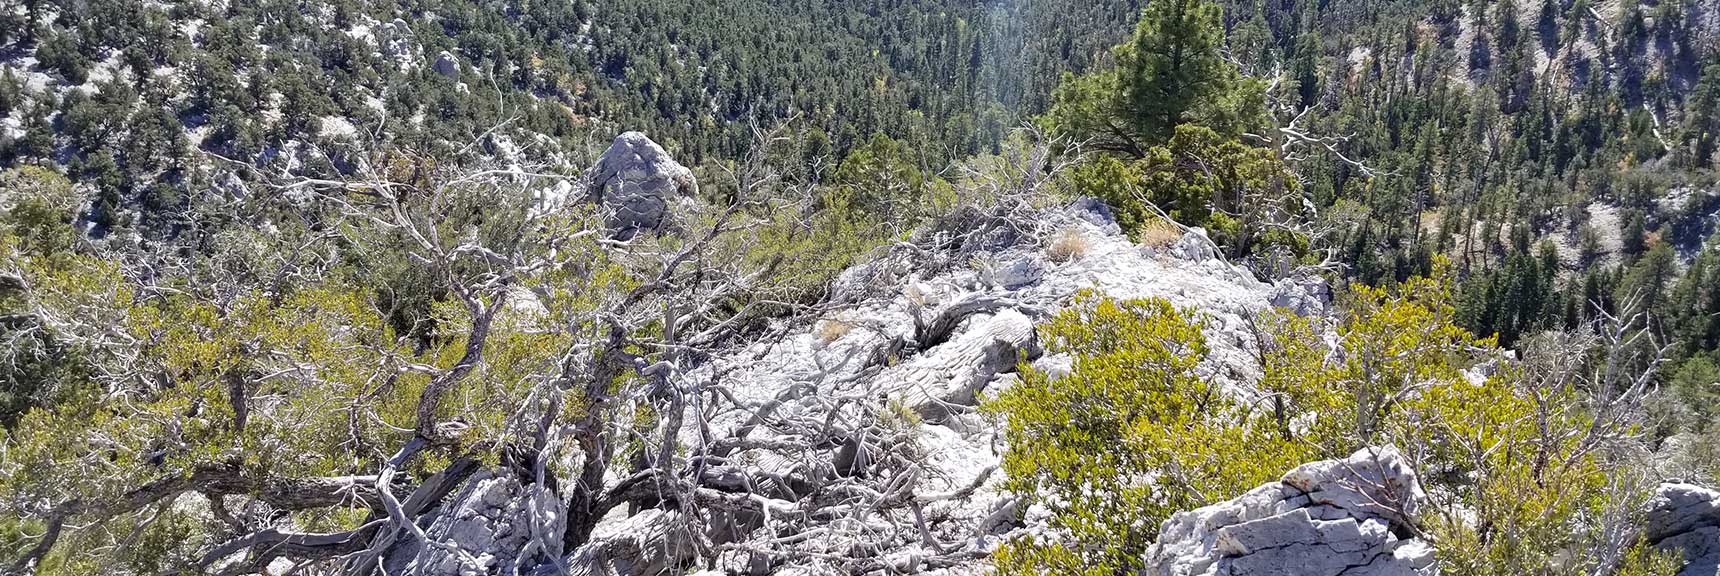 Navigating Rock Formations on the Approach Ridge to Cockscomb Peak and Ridge in Mt. Charleston Wilderness, Nevada